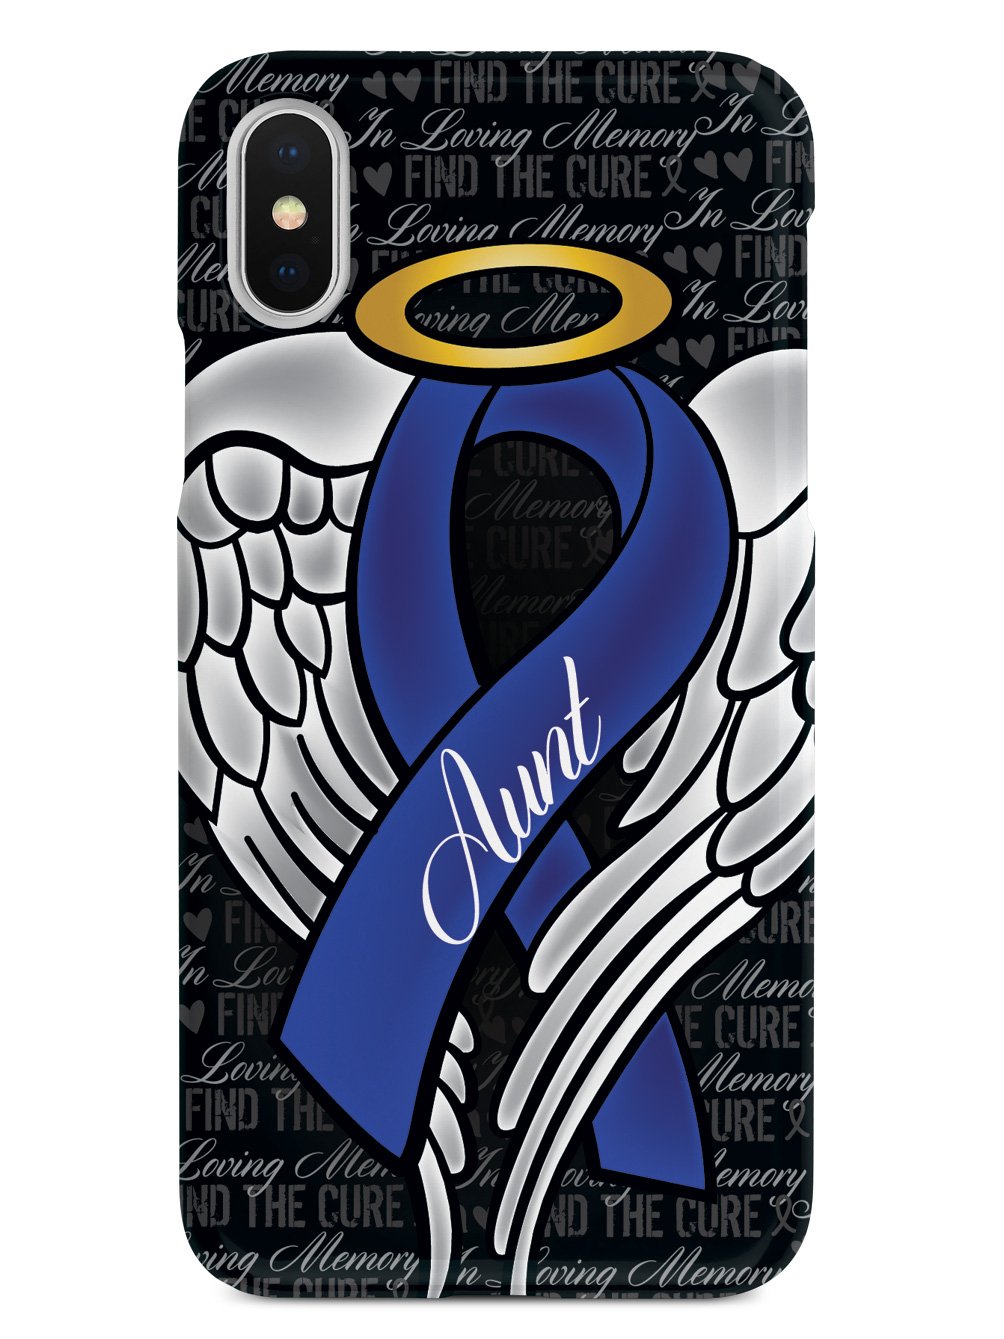 In Loving Memory of My Aunt - Blue Ribbon Case